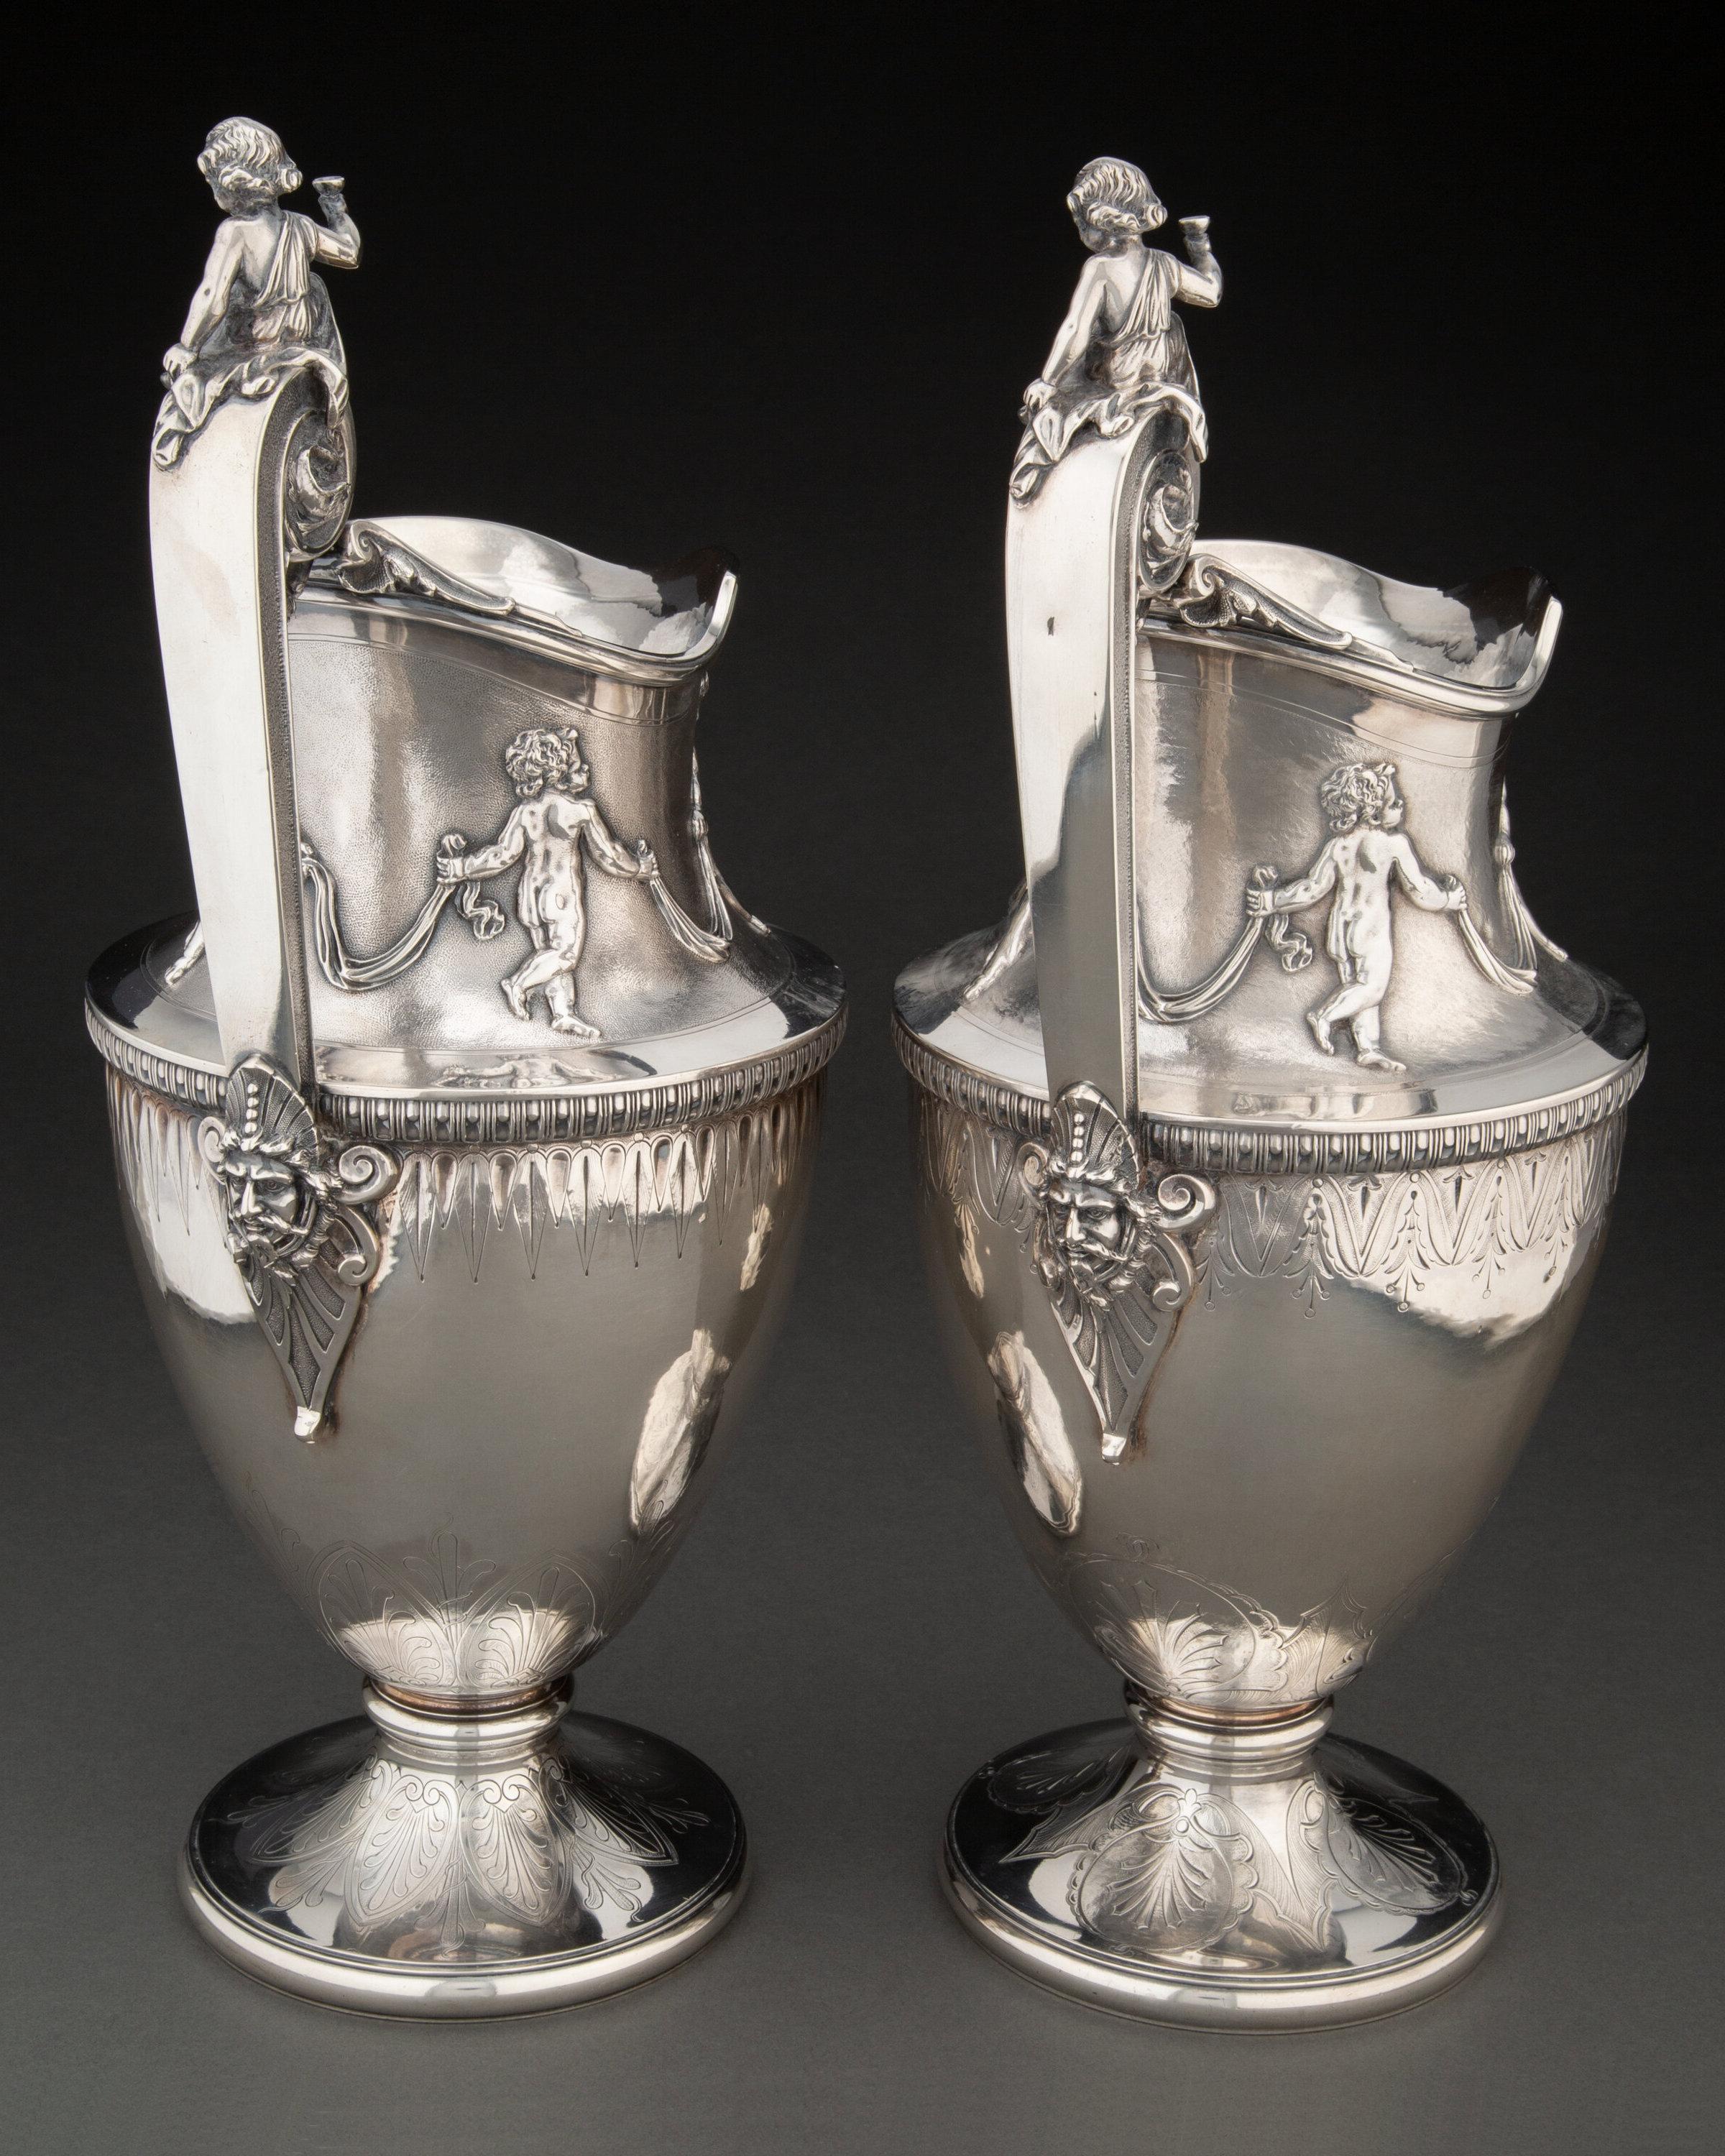 19th Century Pair Neoclassical Silver Water Pitchers by Gorham